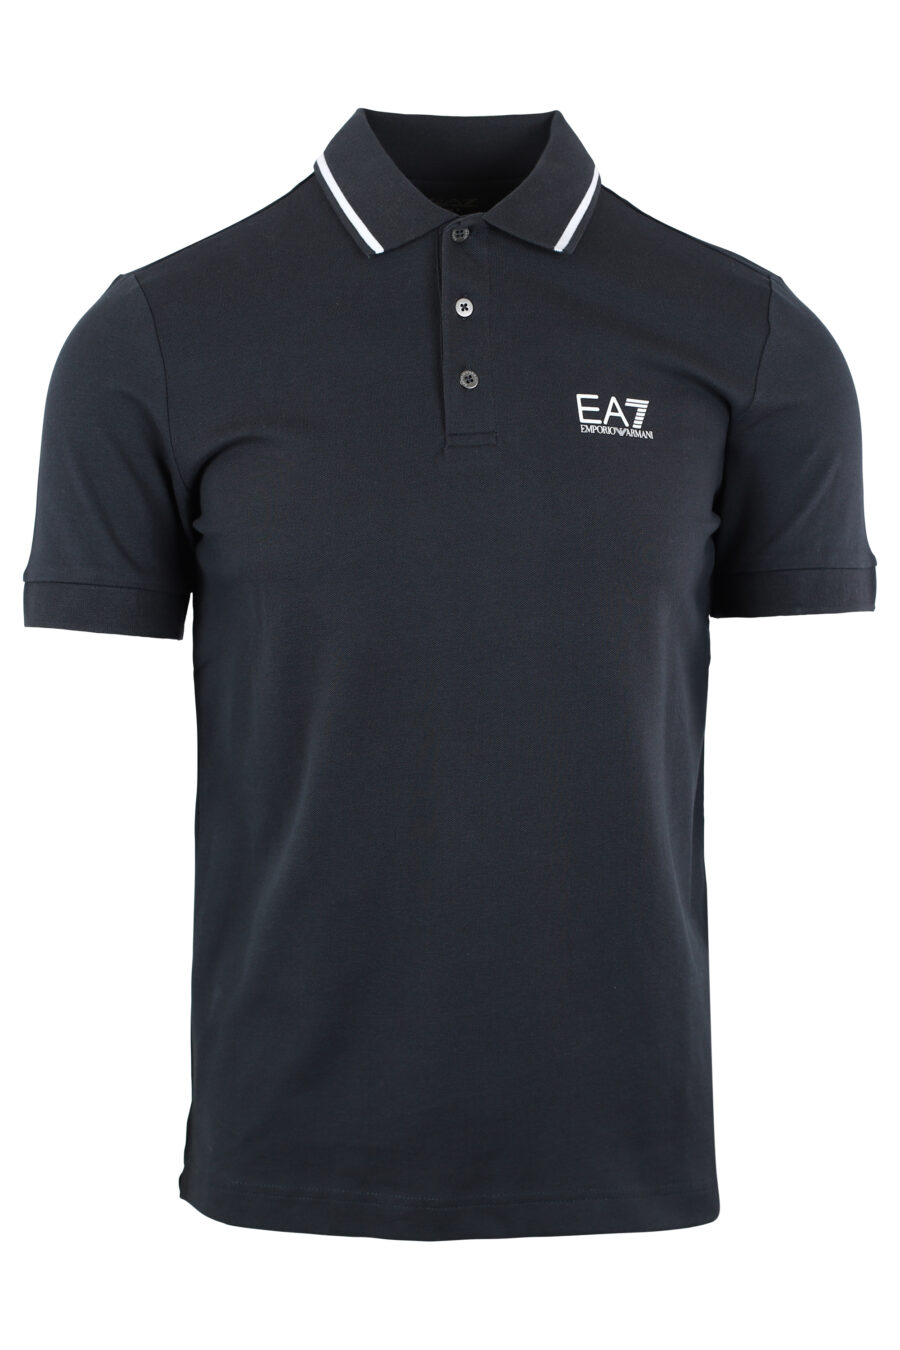 Dark blue polo shirt with rubber mini-logo and collar line - IMG 4623